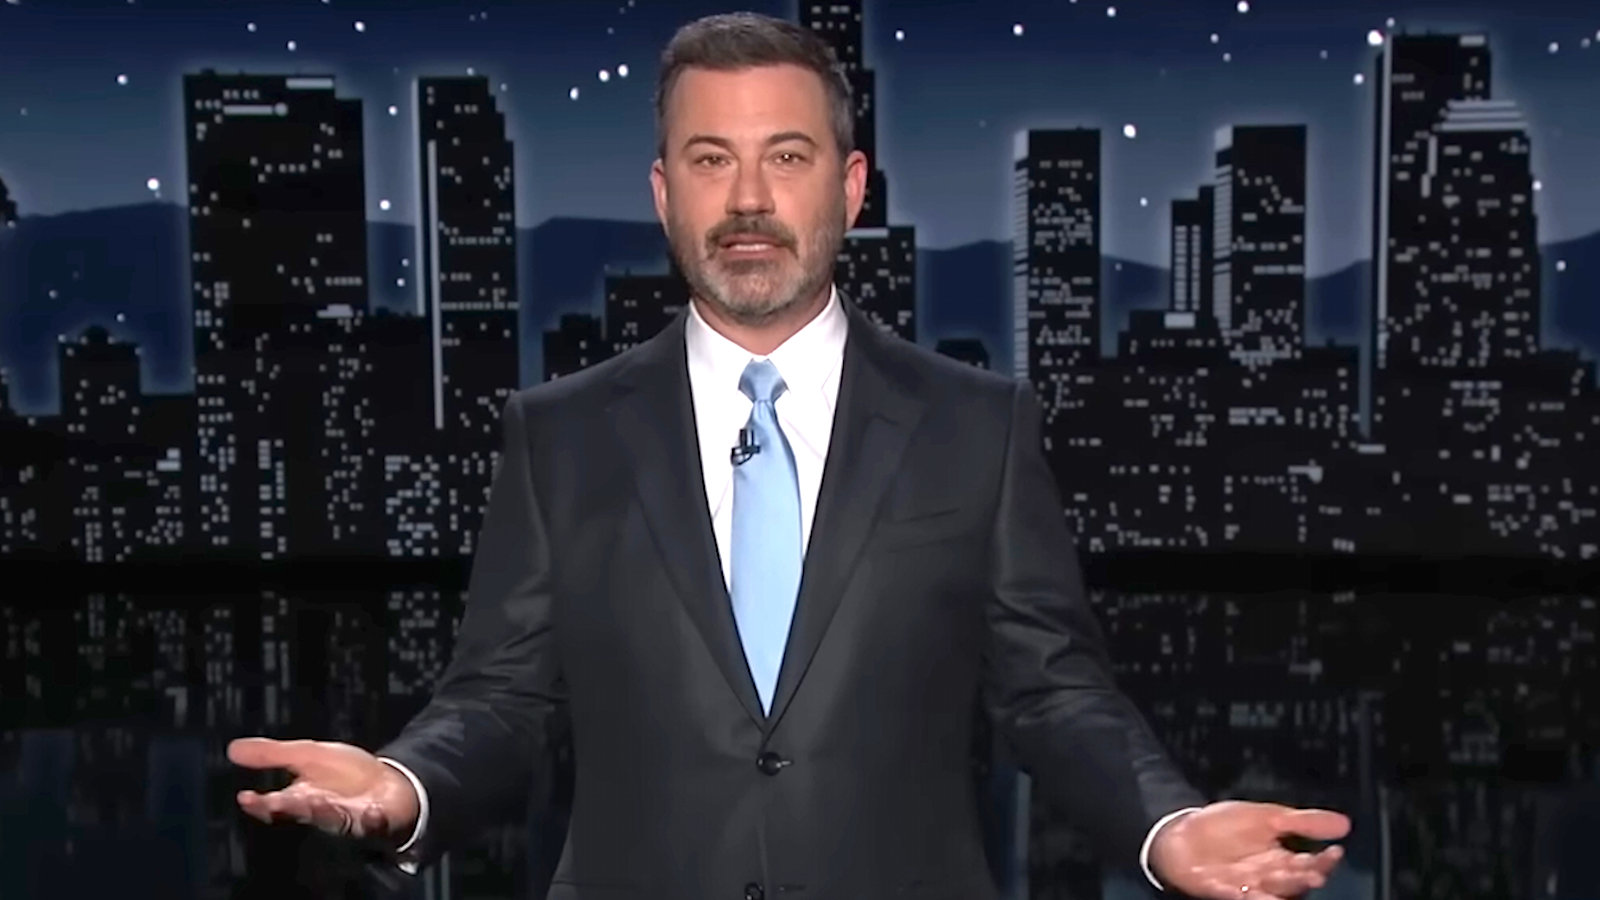 Jimmy Kimmel giving a monologue on Jimmy Kimmel Live wearing a black suit and light blue tie